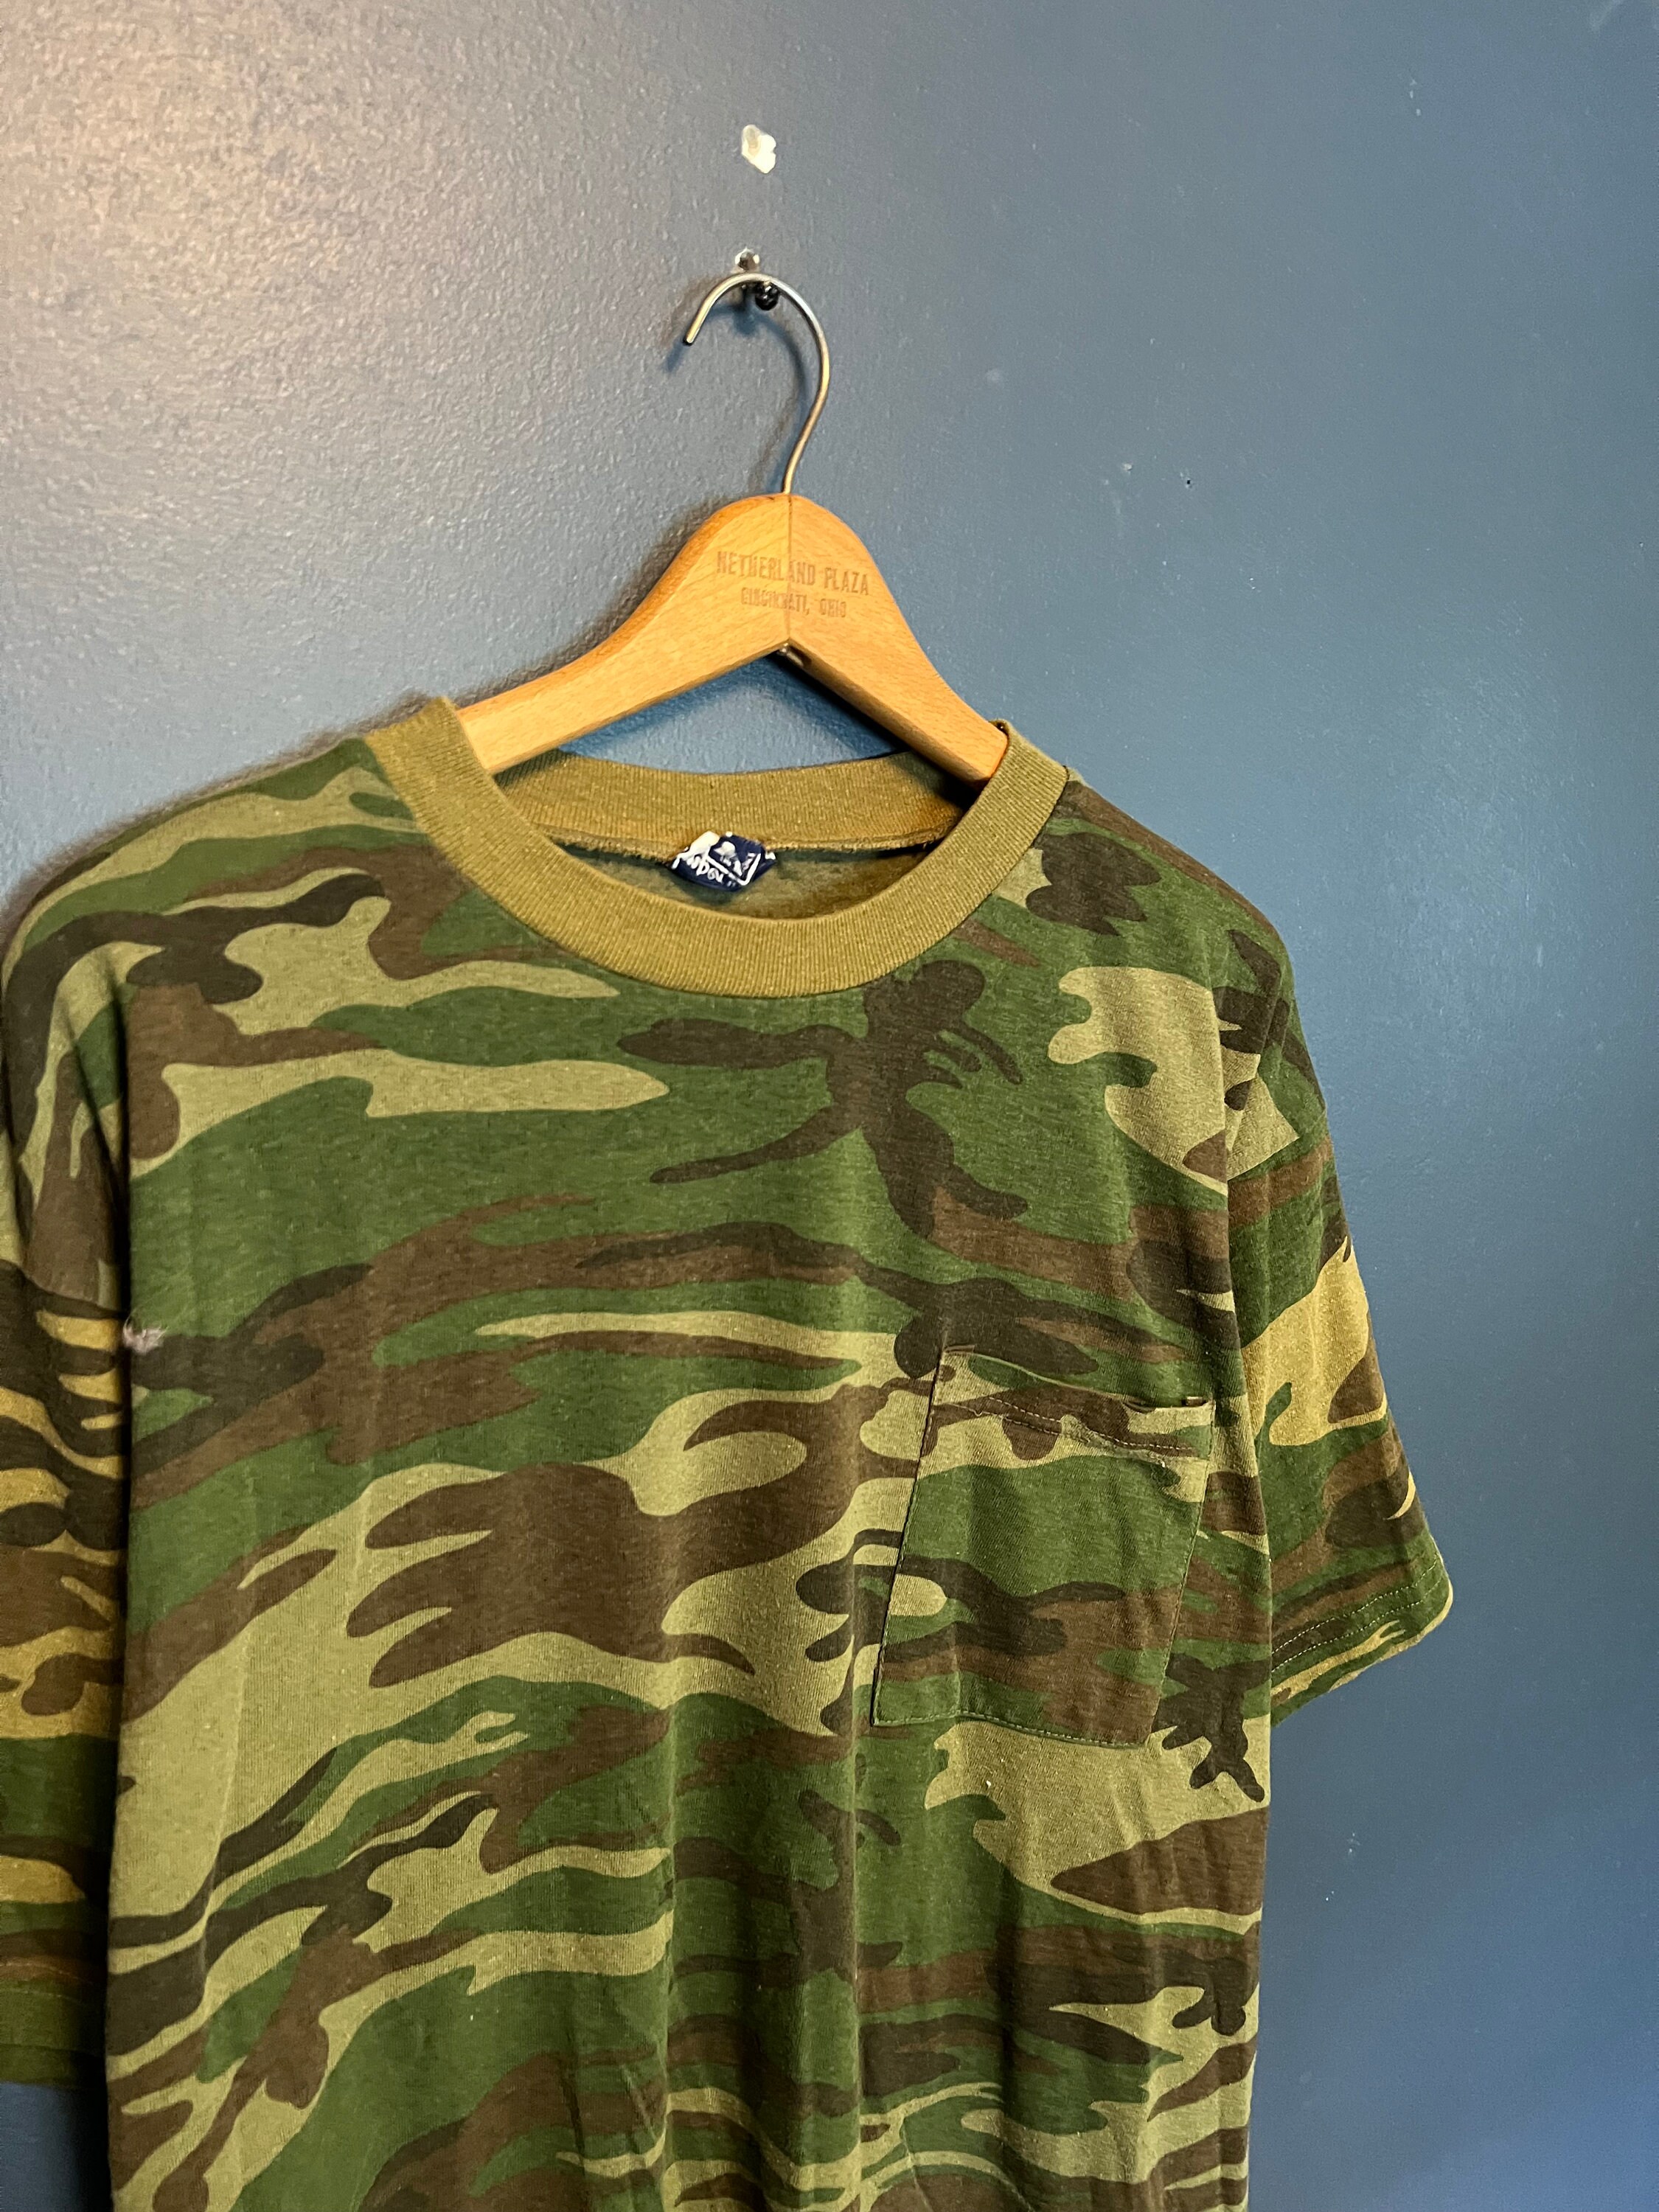 Blank Camouflage Shirts Matching Blank Camo T-shirts for Heat